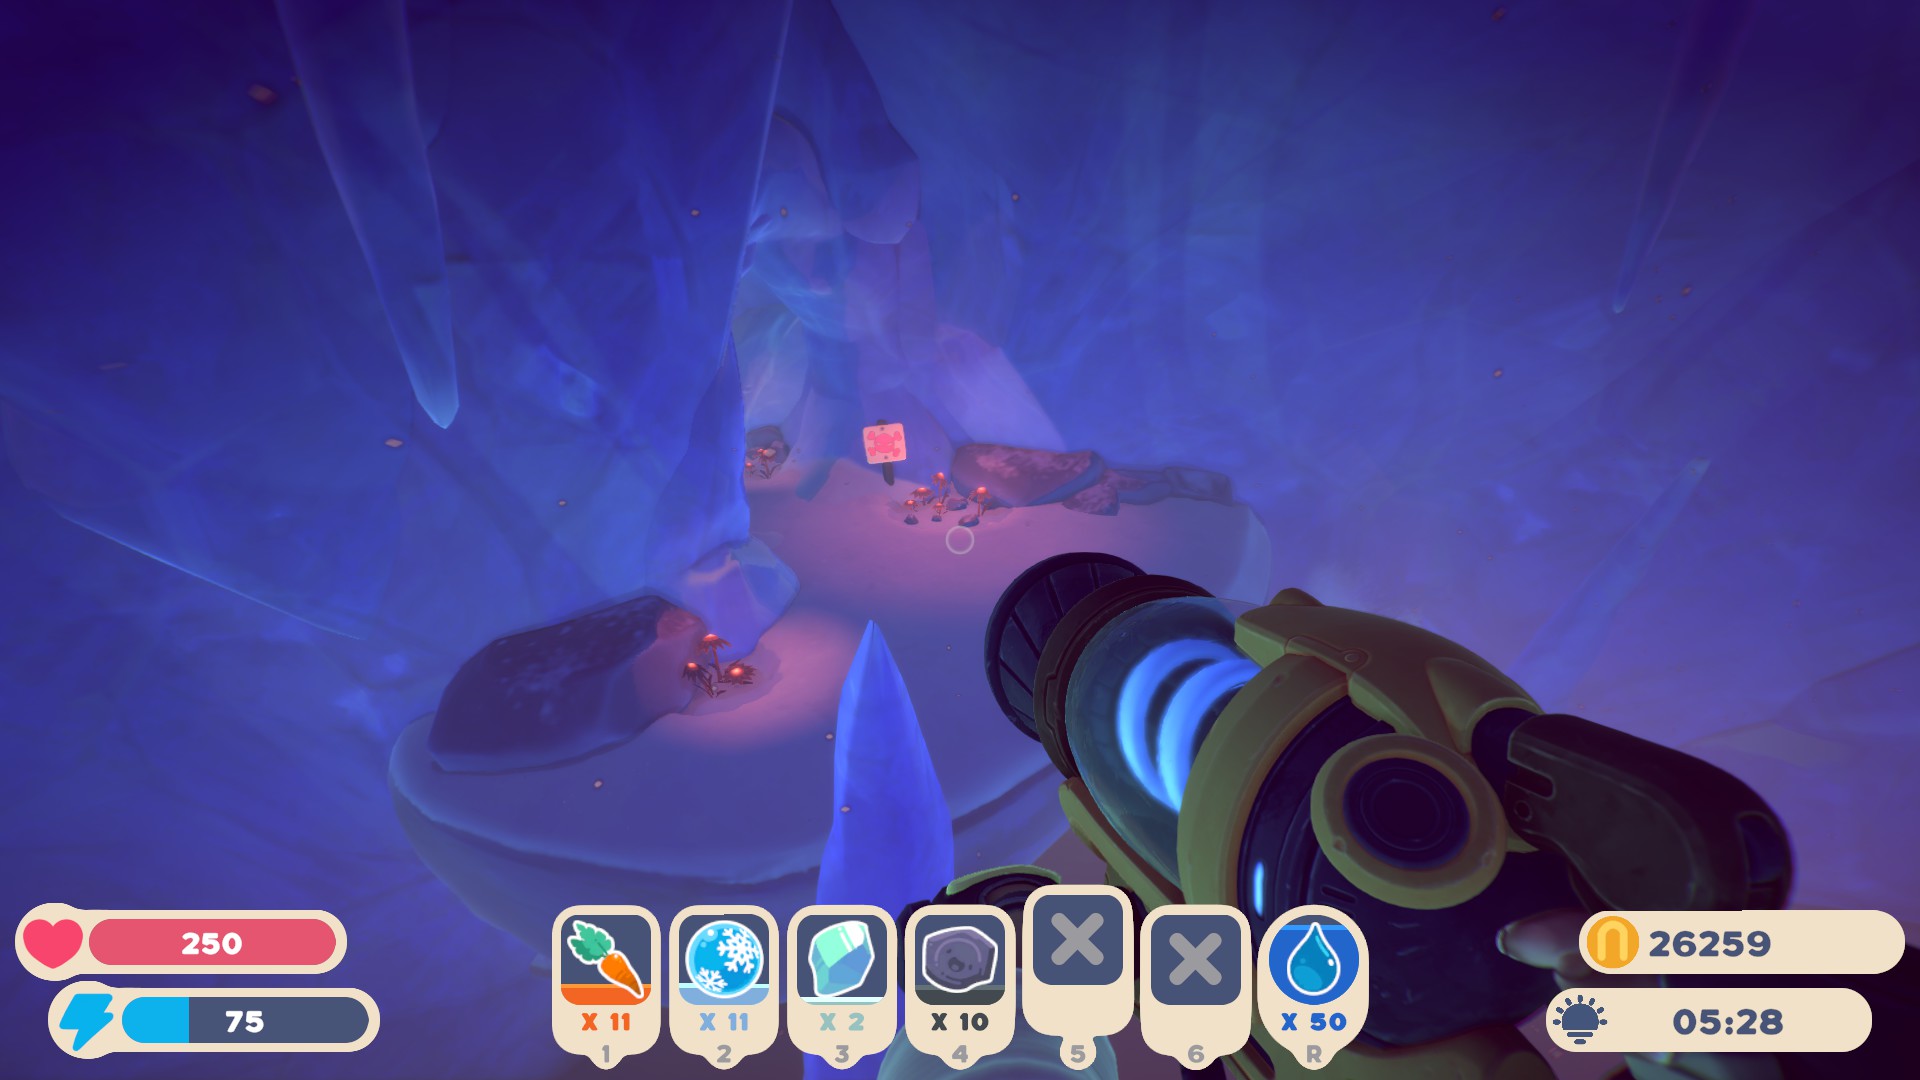 Slime Rancher 2 - Capsule Locations for Powderfall Bluffs - Pods 7 - 12 (Underground) - DE52F53